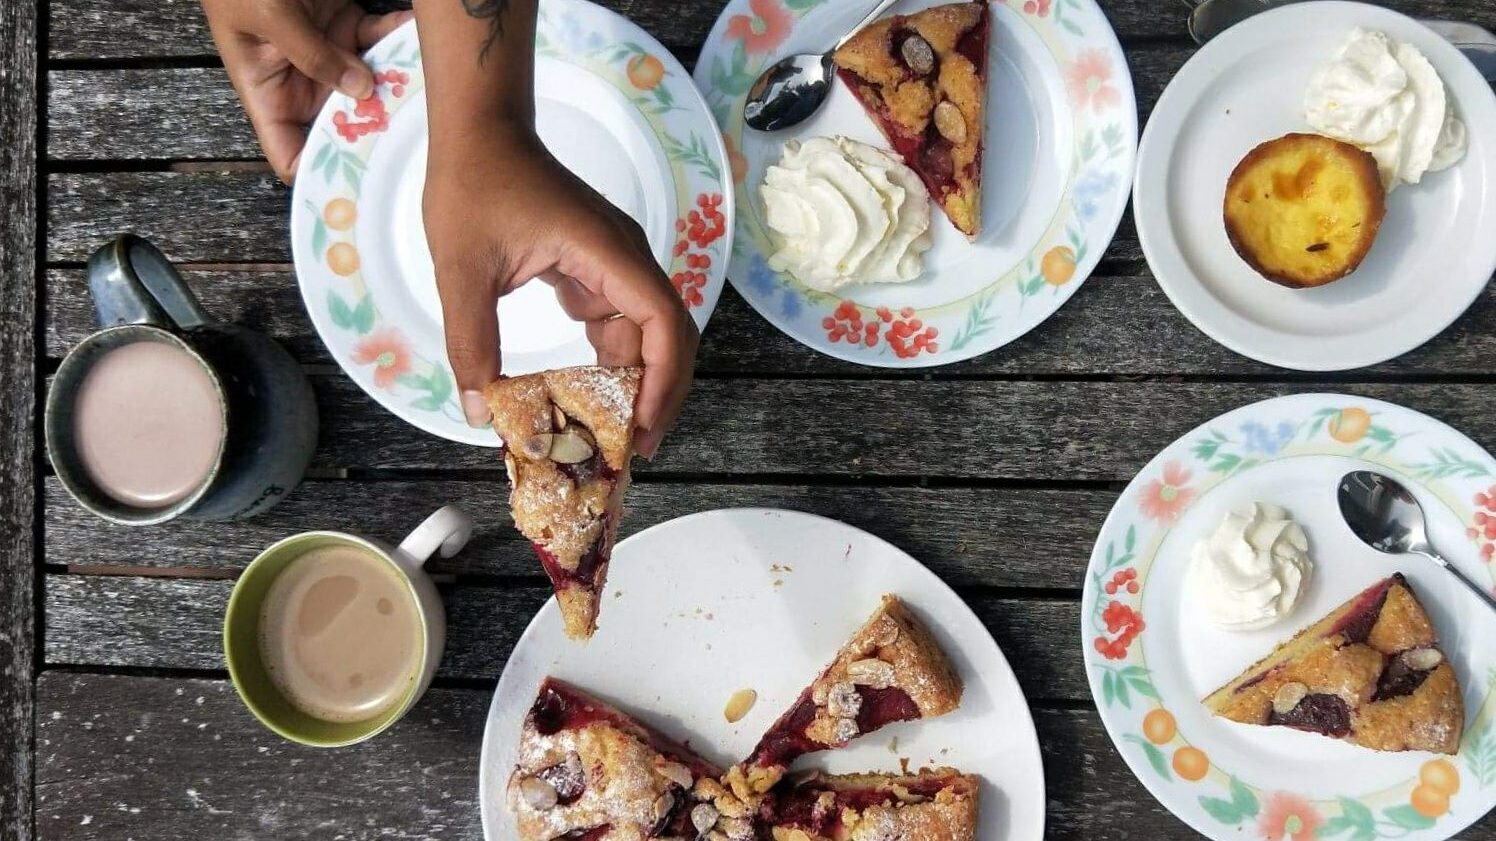 An outdoor table is laden with plates full of desserts. Pies with whipped cream. A hand reaches out to pass a piece of pie.